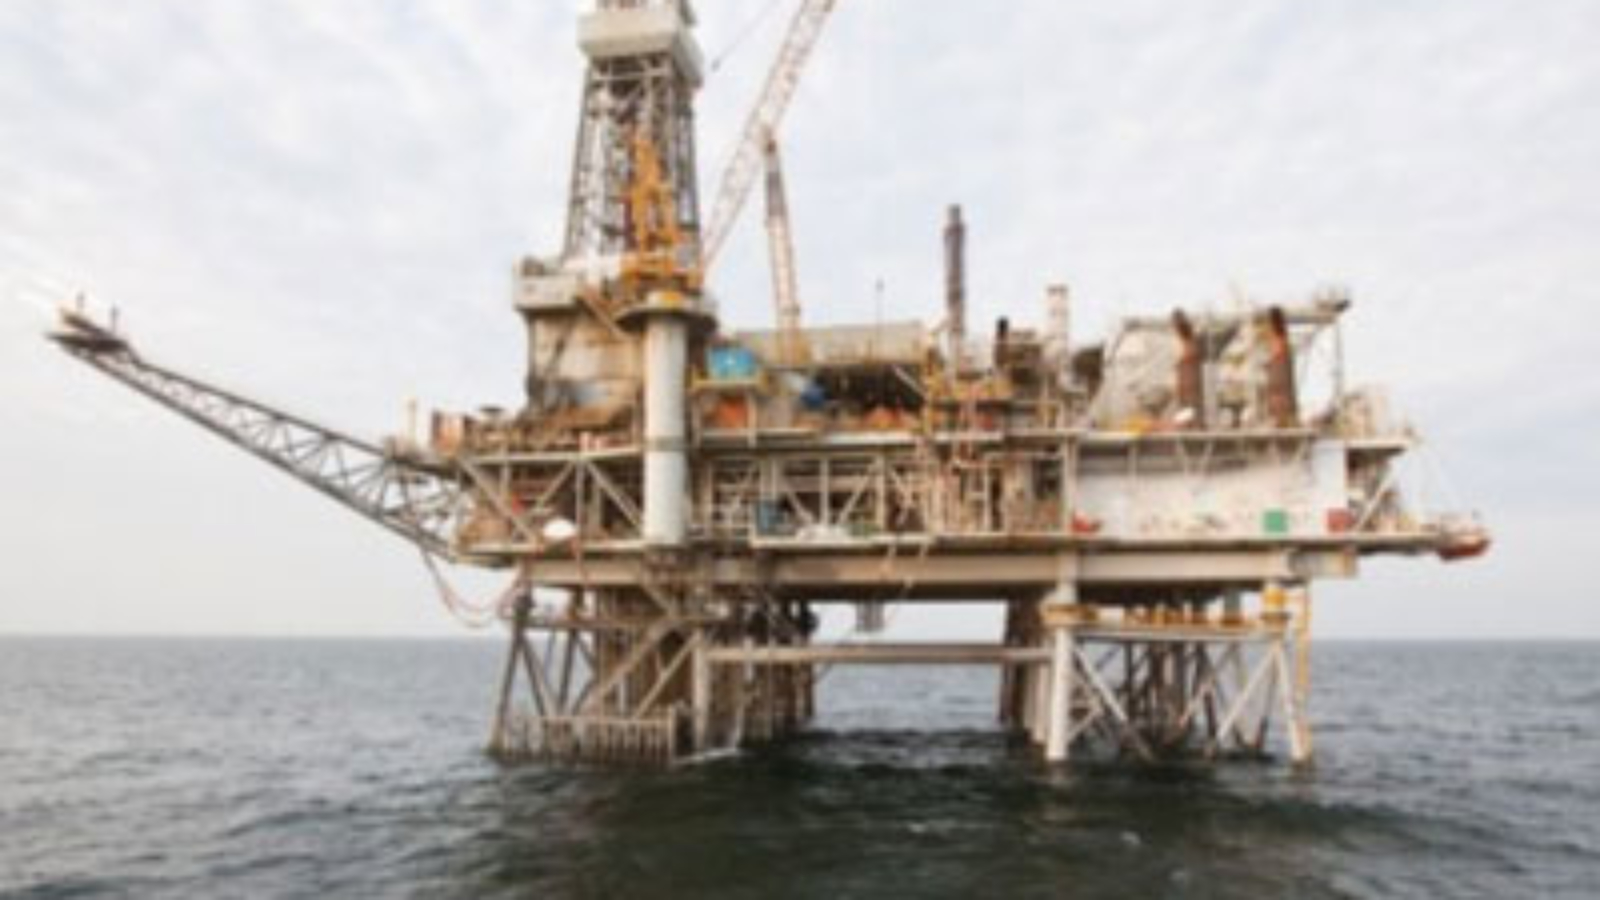 Azerbaijan International Operating Co. (AIOC) has awarded Worley a contract for engineering, procurement and construction services as part of a gas lift project.